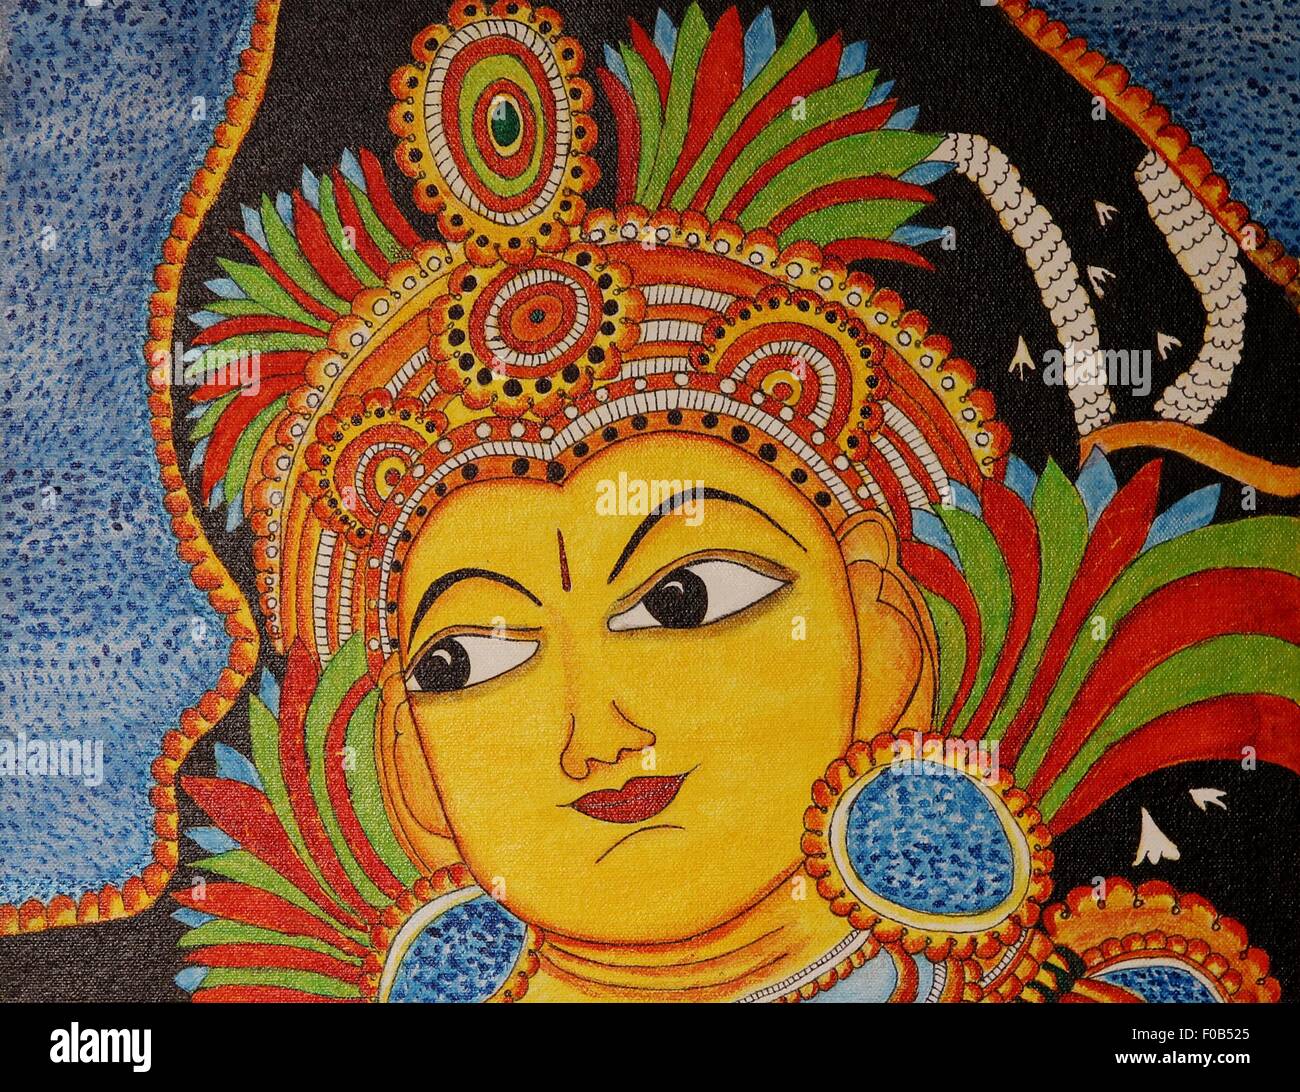 Mural Painting of Lord Krishna on Canvas Stock Photo